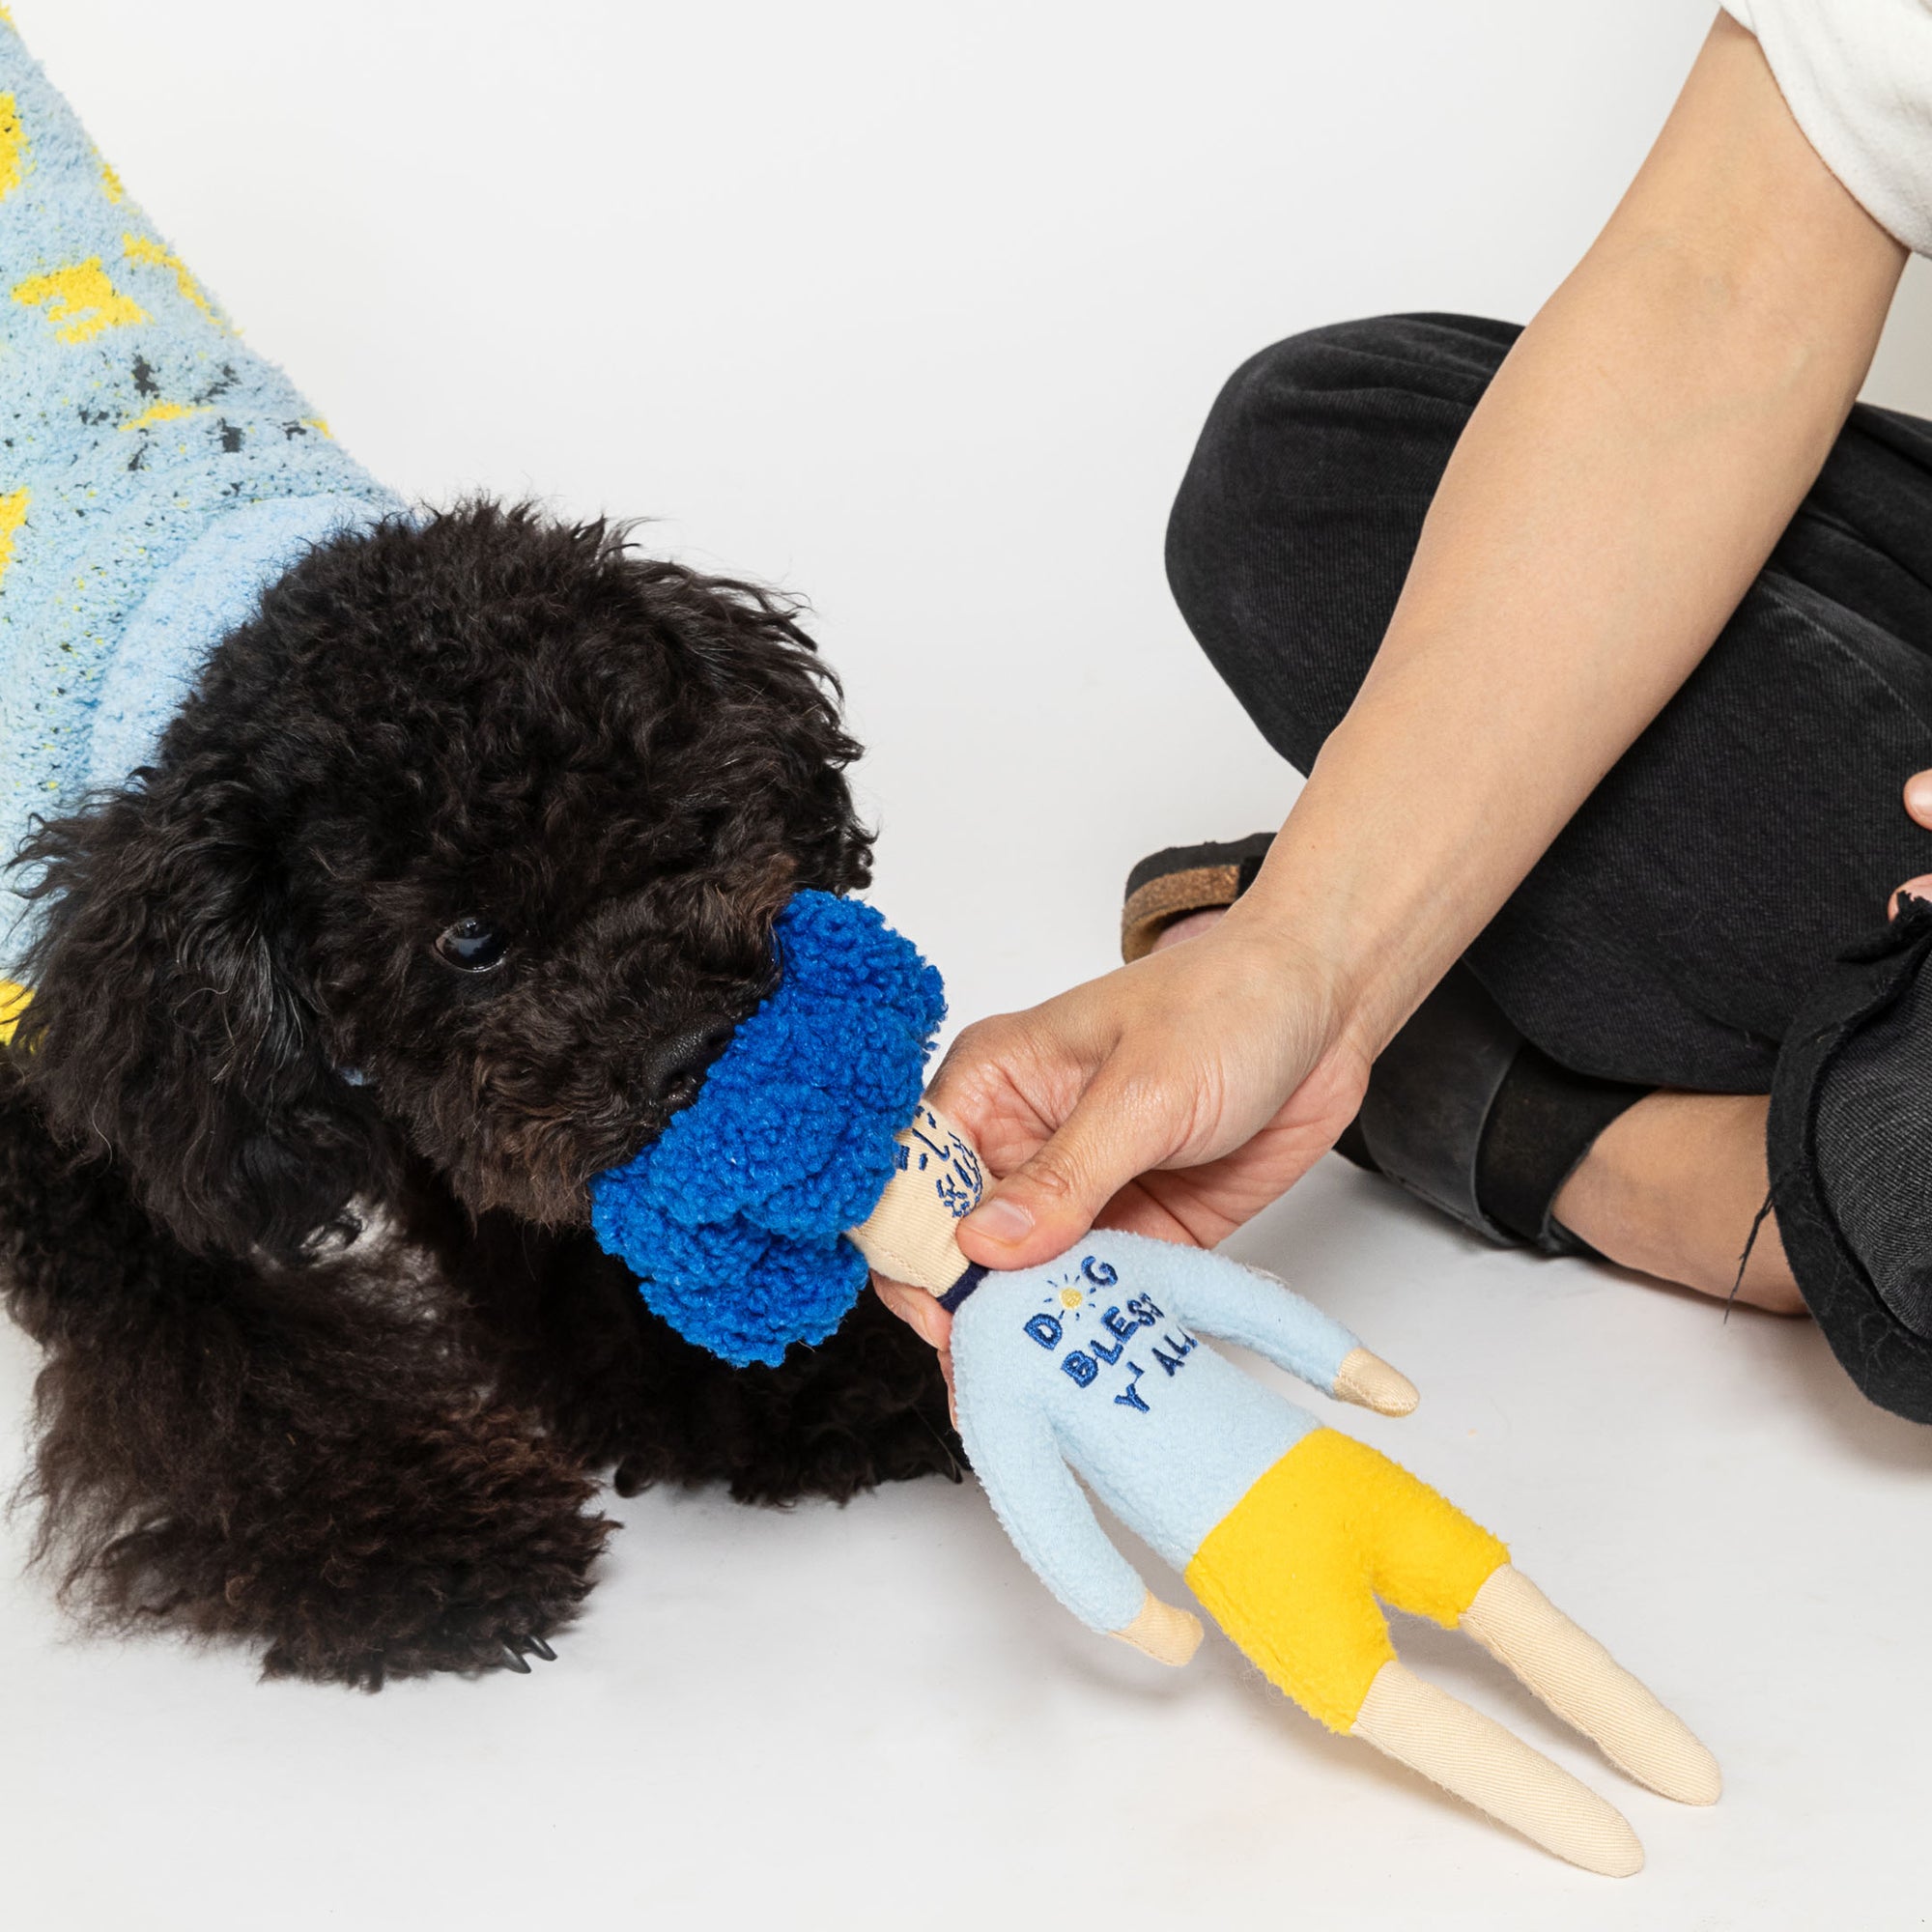 The photo shows a black curly-haired dog, possibly a Poodle or a similar breed, biting a blue-haired doll-shaped nosework toy presented by a person's hand. The interaction takes place against a white background, with the dog wearing a blue sweater, and the toy appears to be a playful and engaging tool for the dog's scent detection and cognitive stimulation activities.